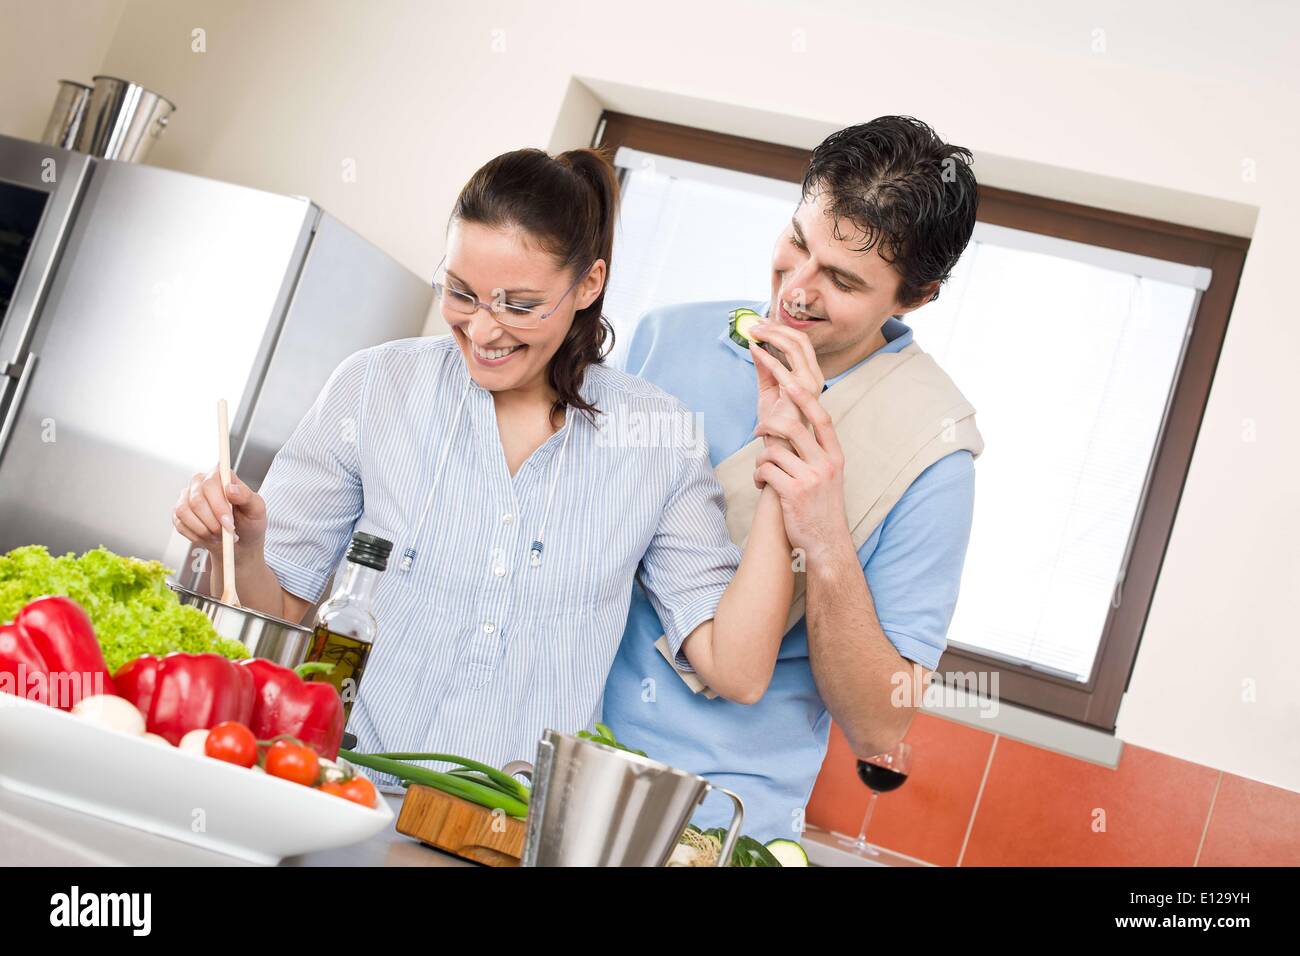 Mar. 30, 2010 - March 30, 2010 - Smiling couple cook in modern kitchen with vegetables Ã‚Â© CTK/ZUMAPR) Stock Photo